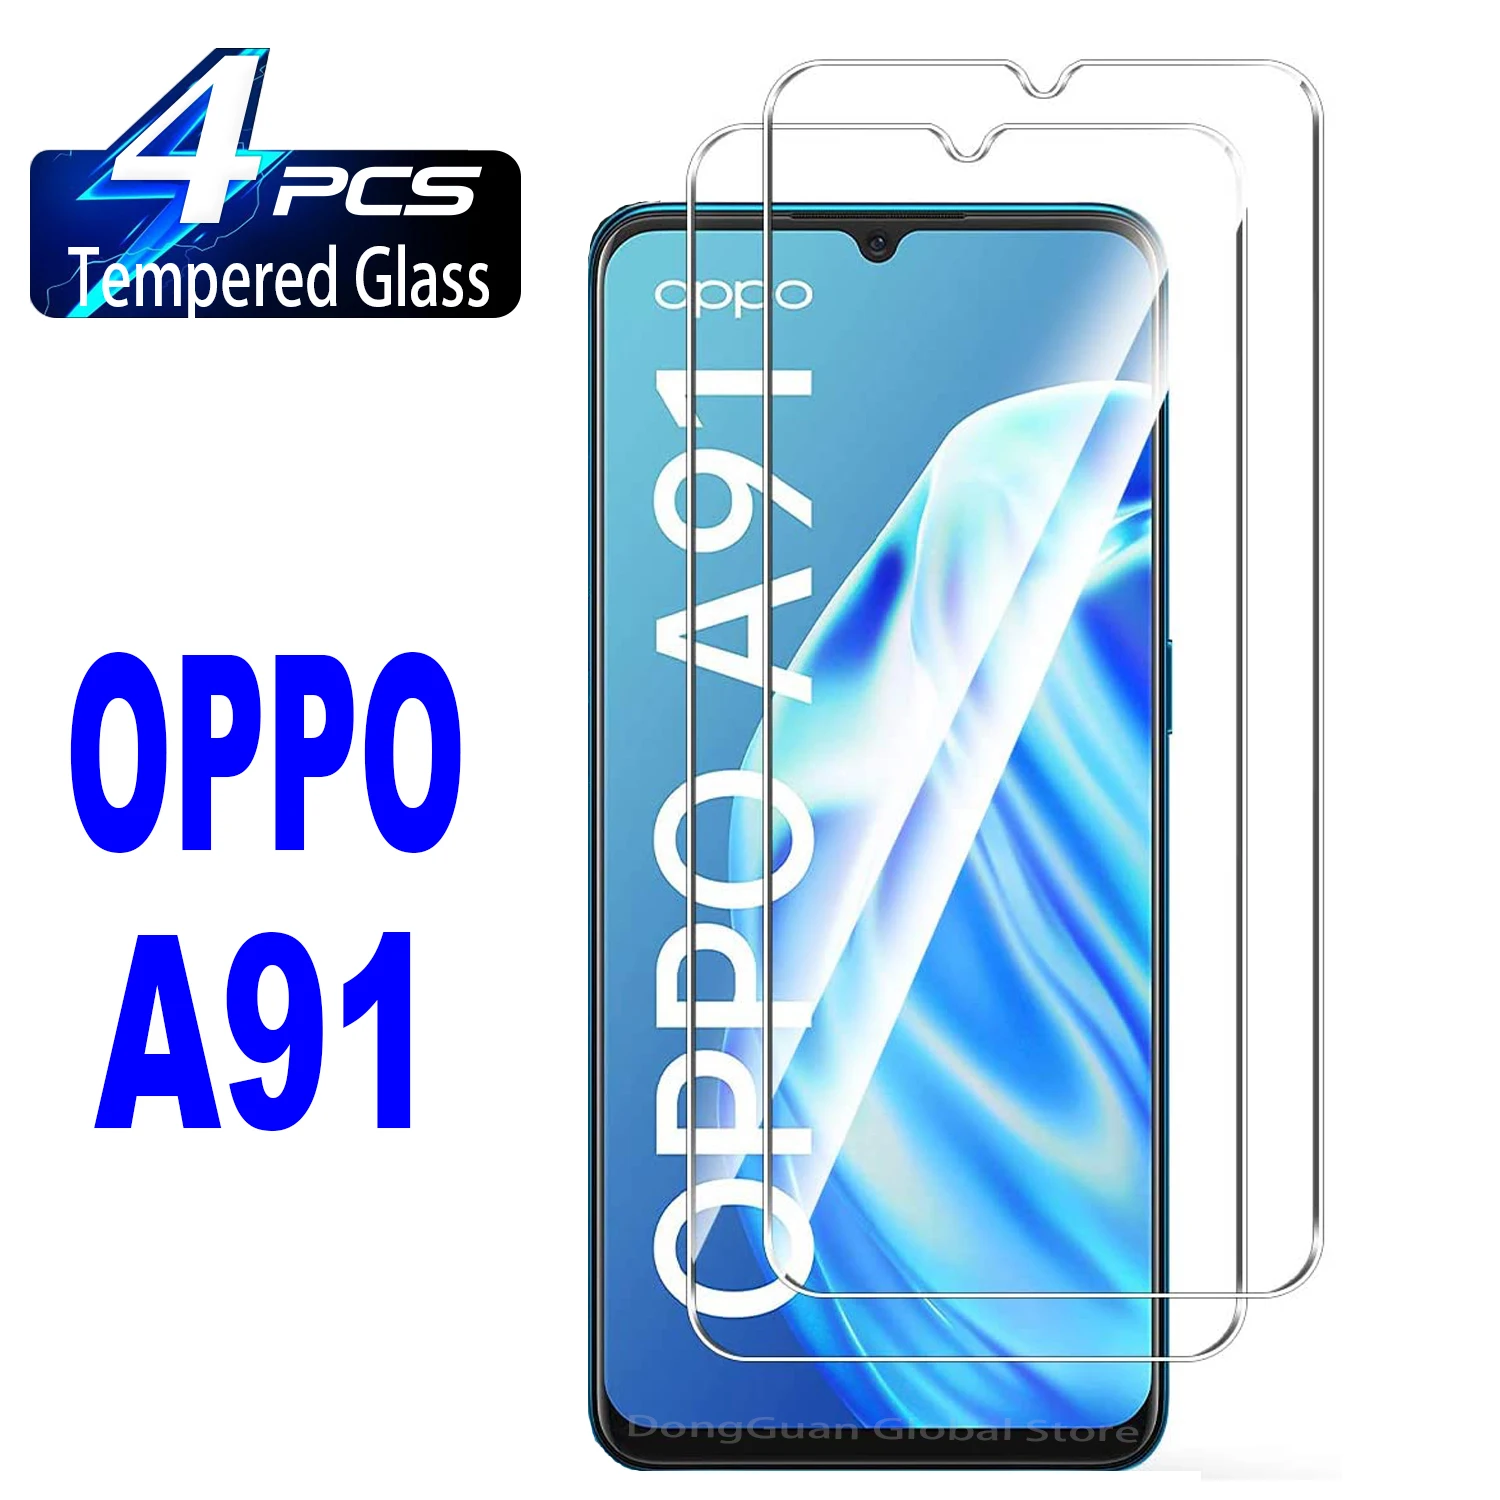 2/4Pcs Tempered Glass For OPPO A91 Screen Protector Glass Film tempered glass for oppo a53 a72 glass screen protector on oppo a9 a53 a93 a72 a1k 2020 a91 a92 a94 4g ax7 a 72 protective glass